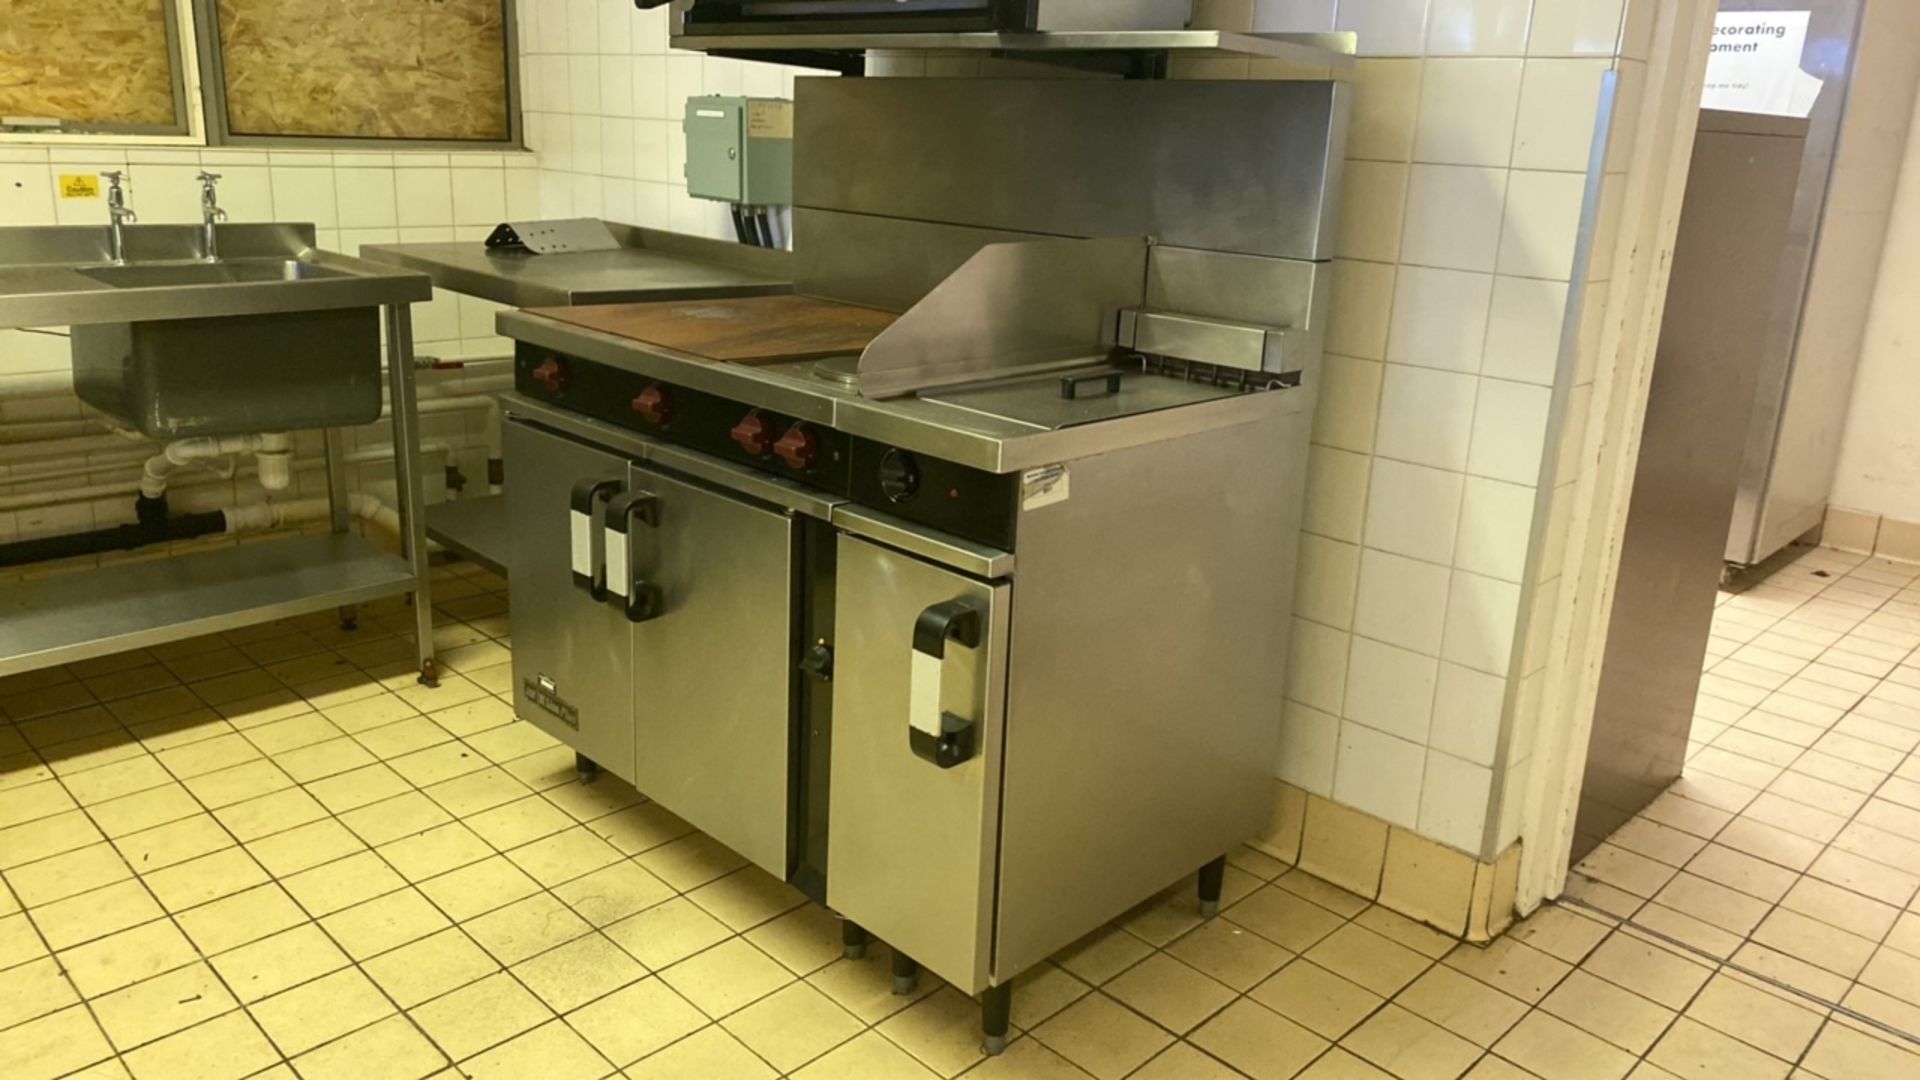 Morewood M Line Plus Solid Top Oven with Fryer - Image 3 of 5